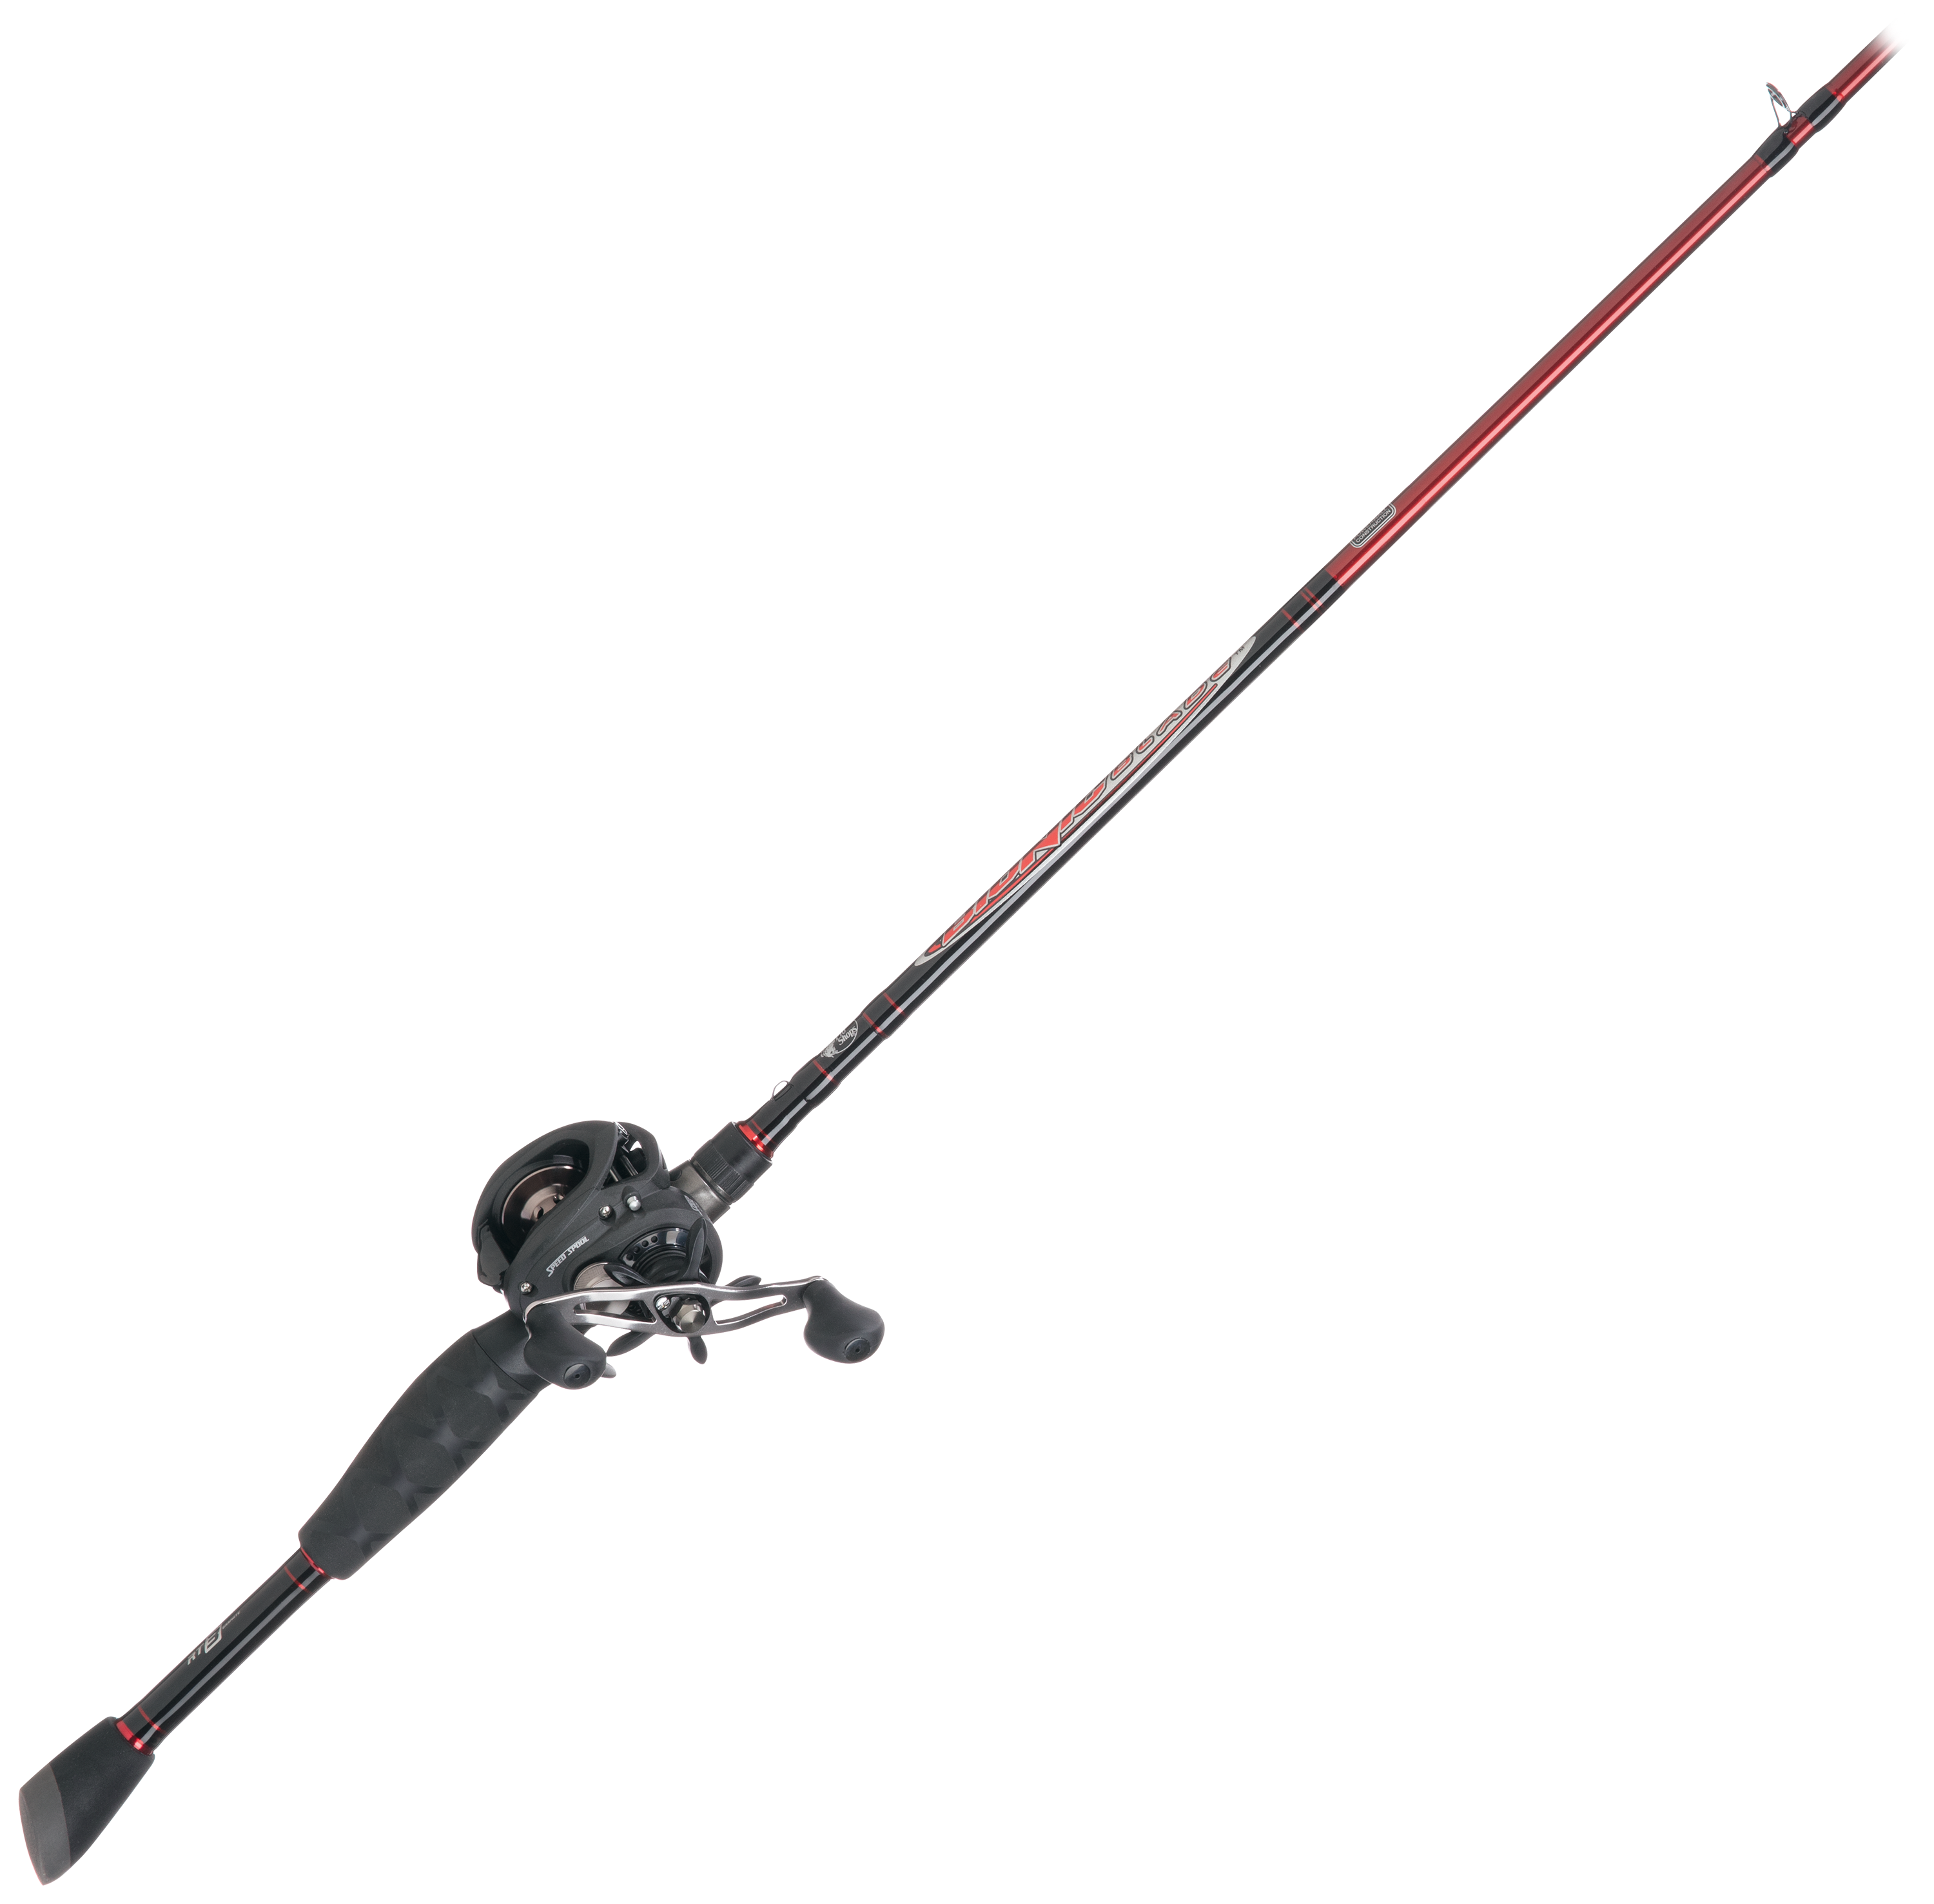 Salt And Freshwater Casting Rod & Reel Combos - Go Salmon Fishing